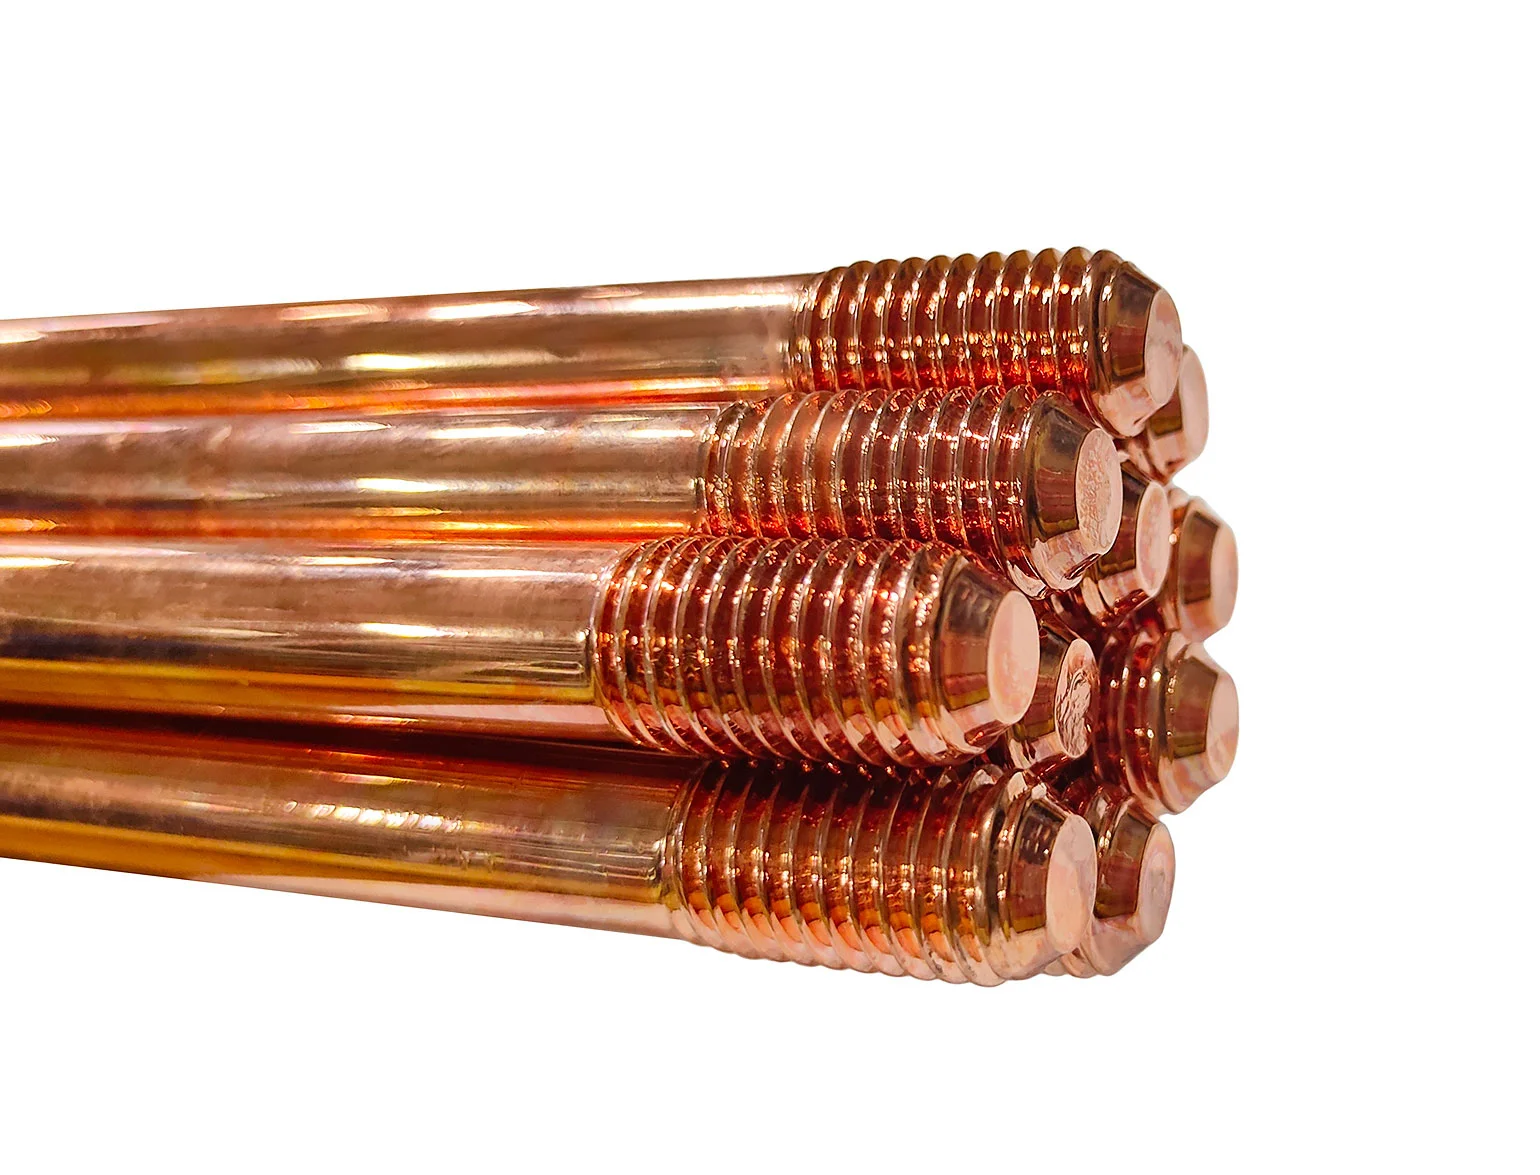 Why Is the Thickness of Copper Coating So Important for Grounding Rods?